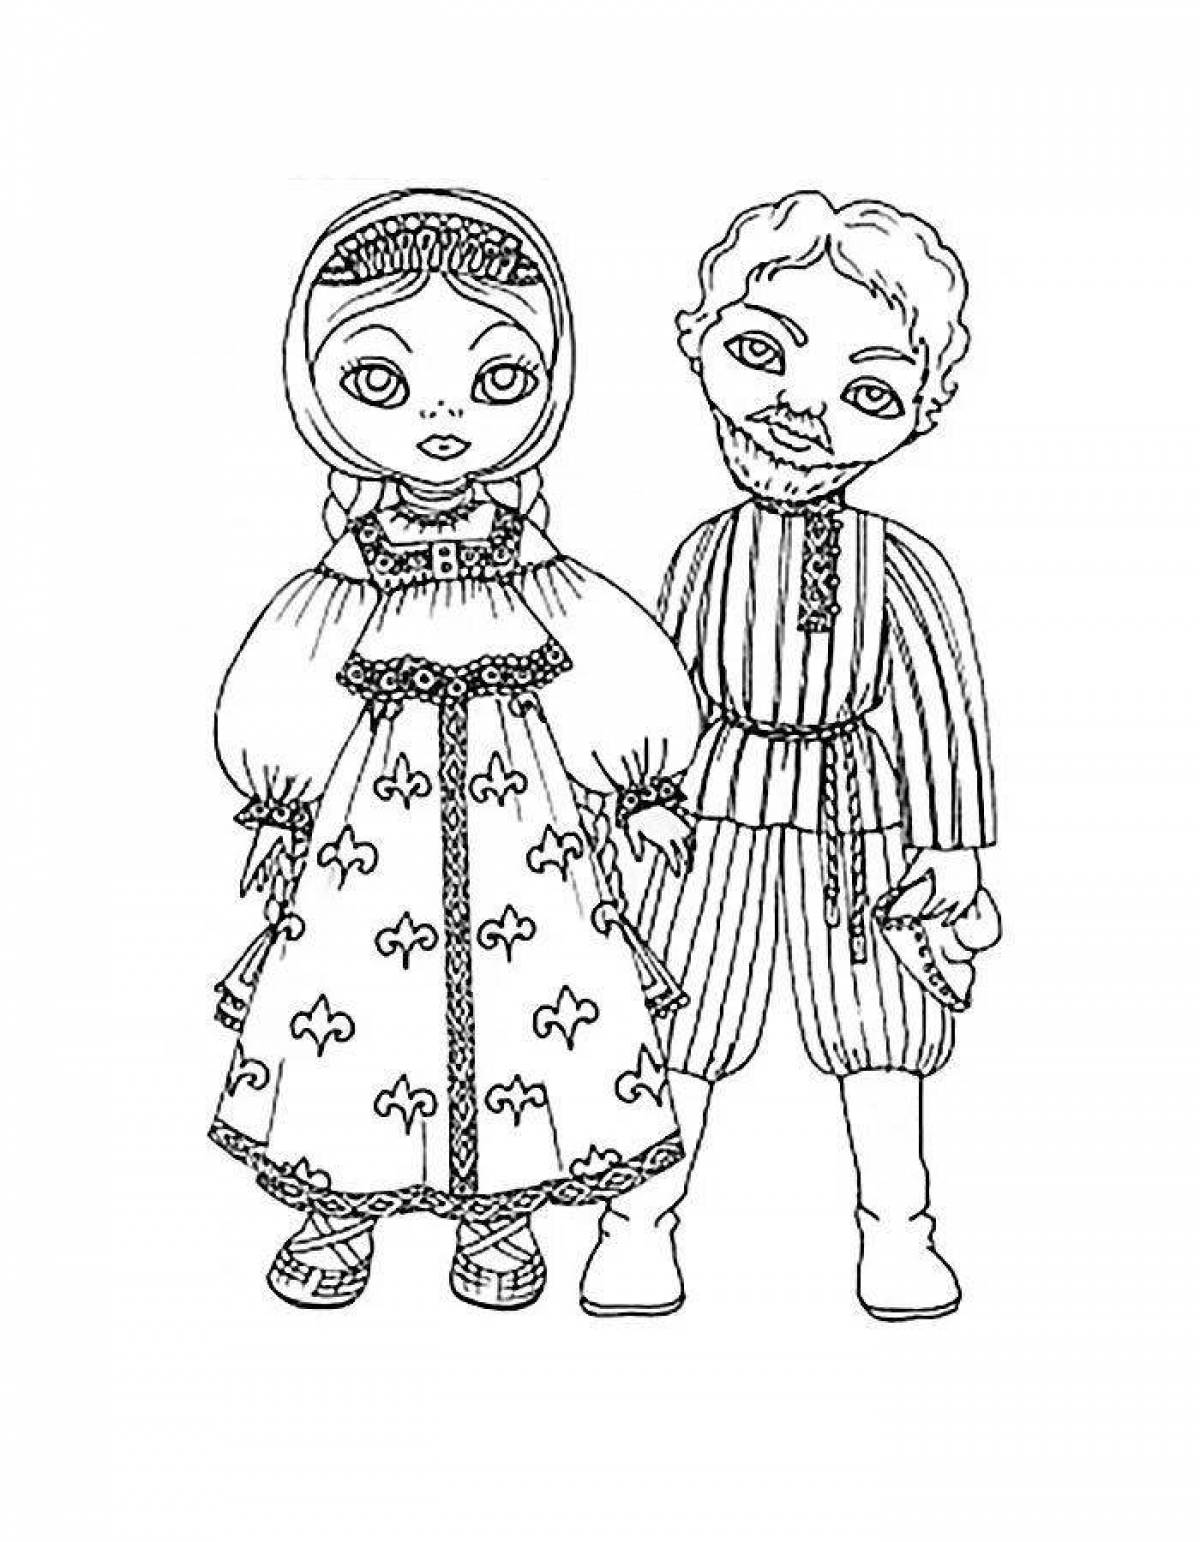 Coloring page cheerful national costume